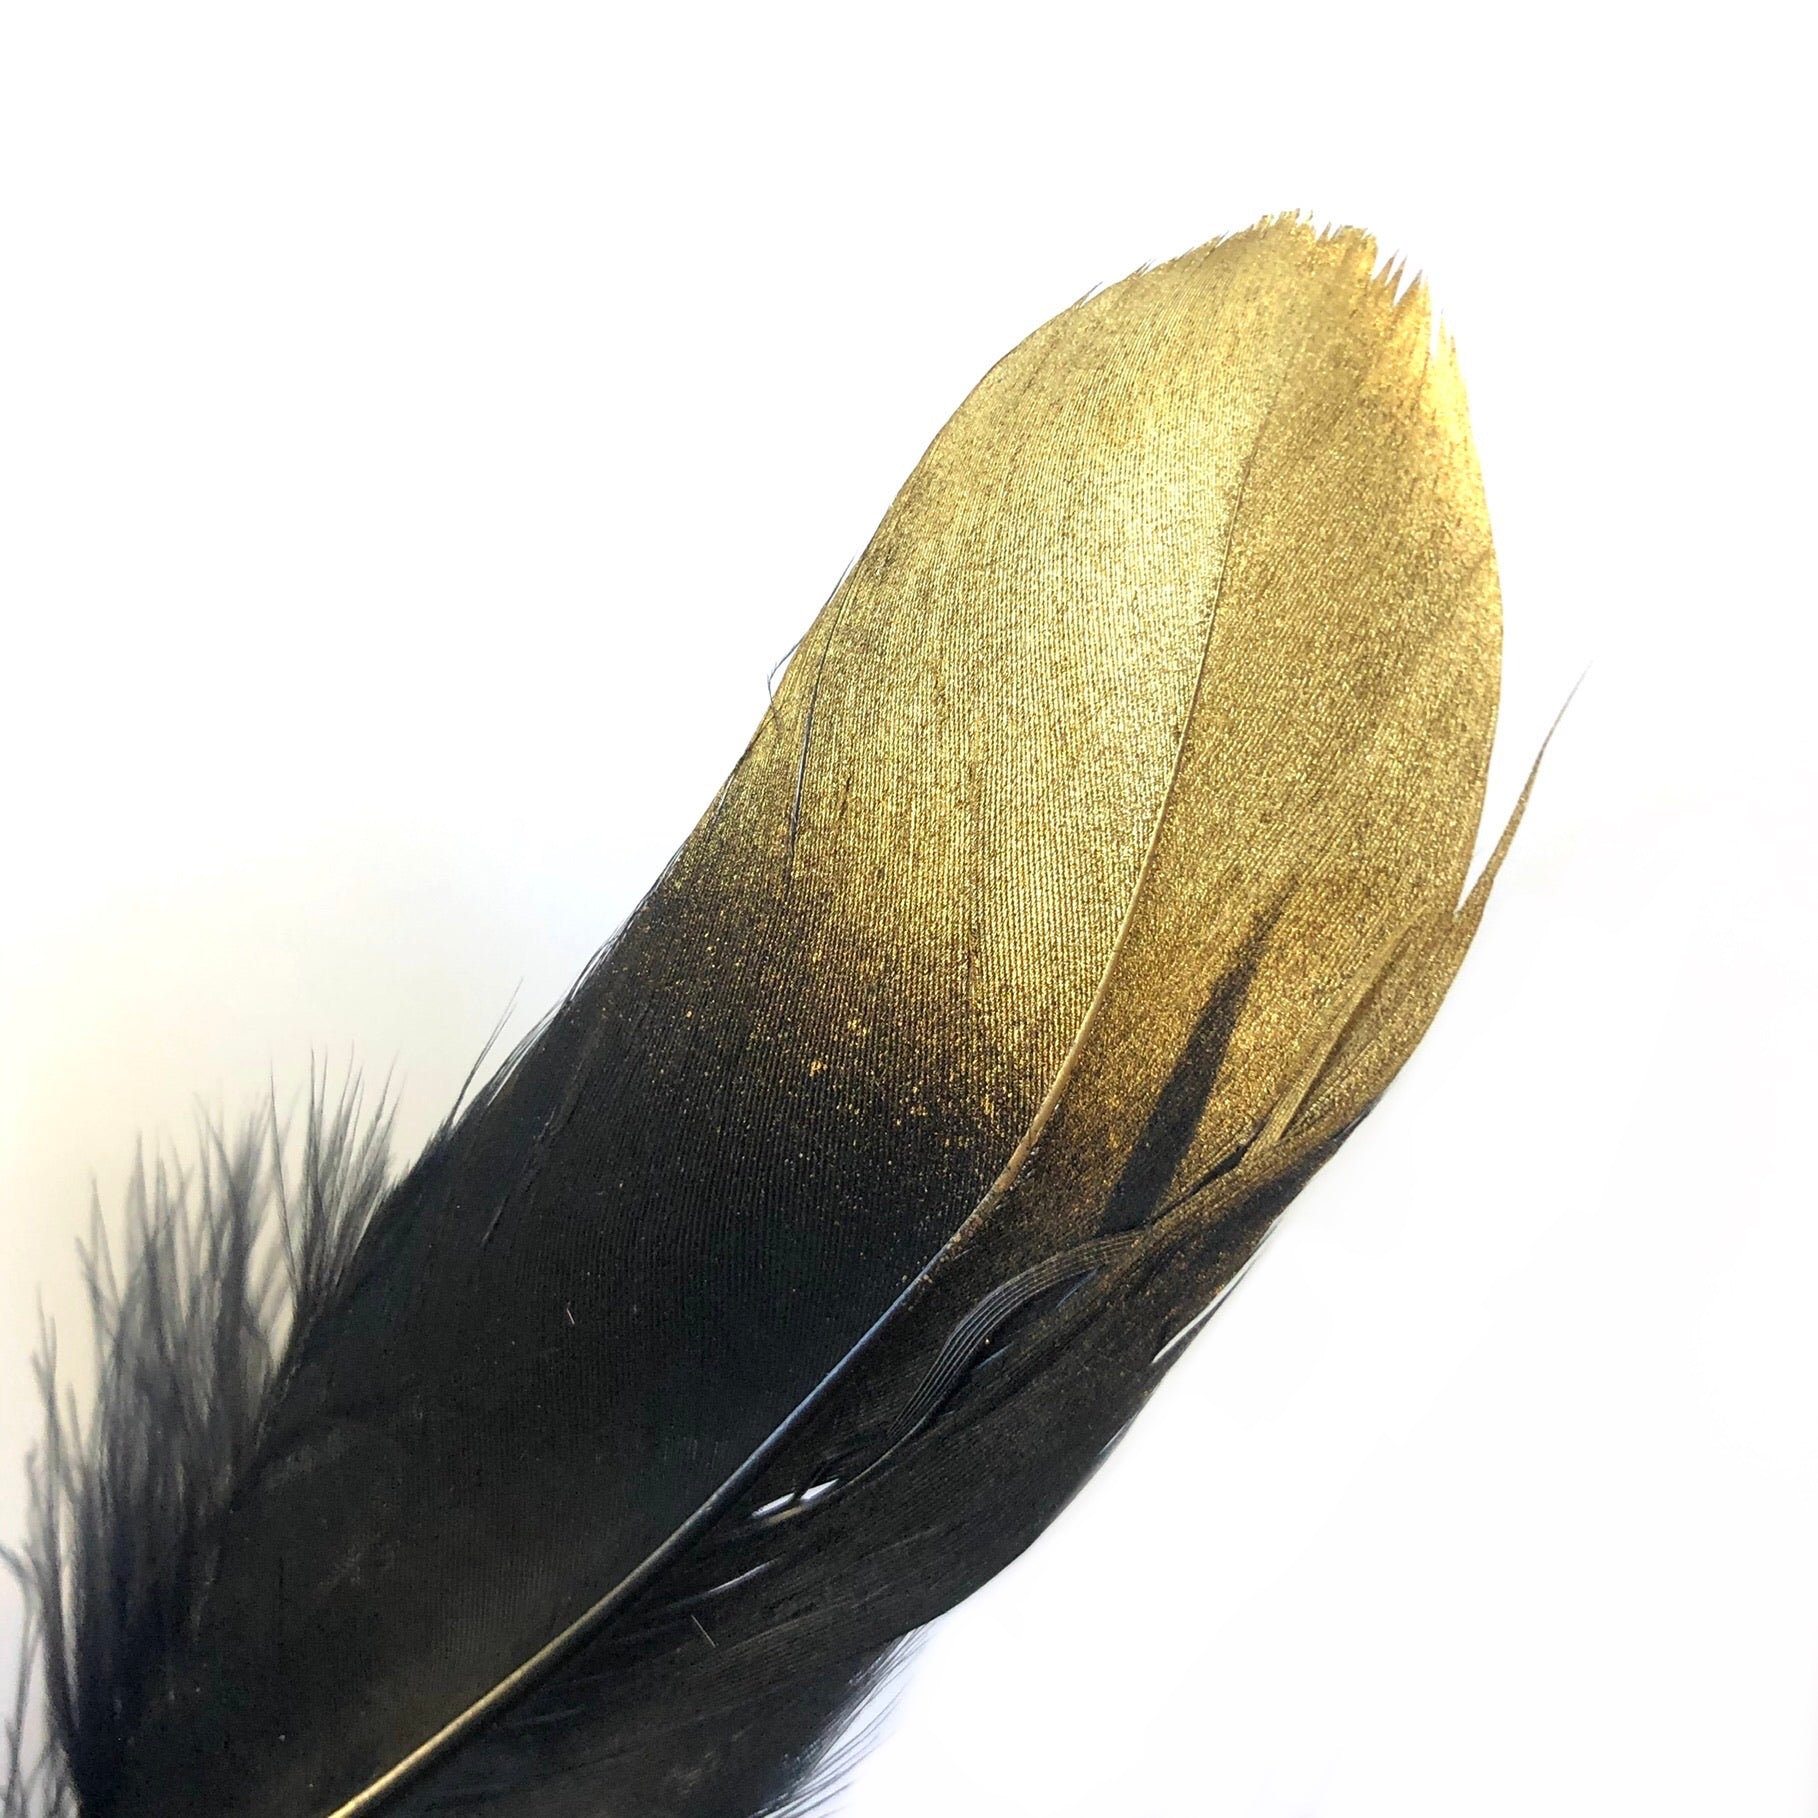 Goose Pointer Feather Gold Tipped x 10 pcs - Black - Style 22